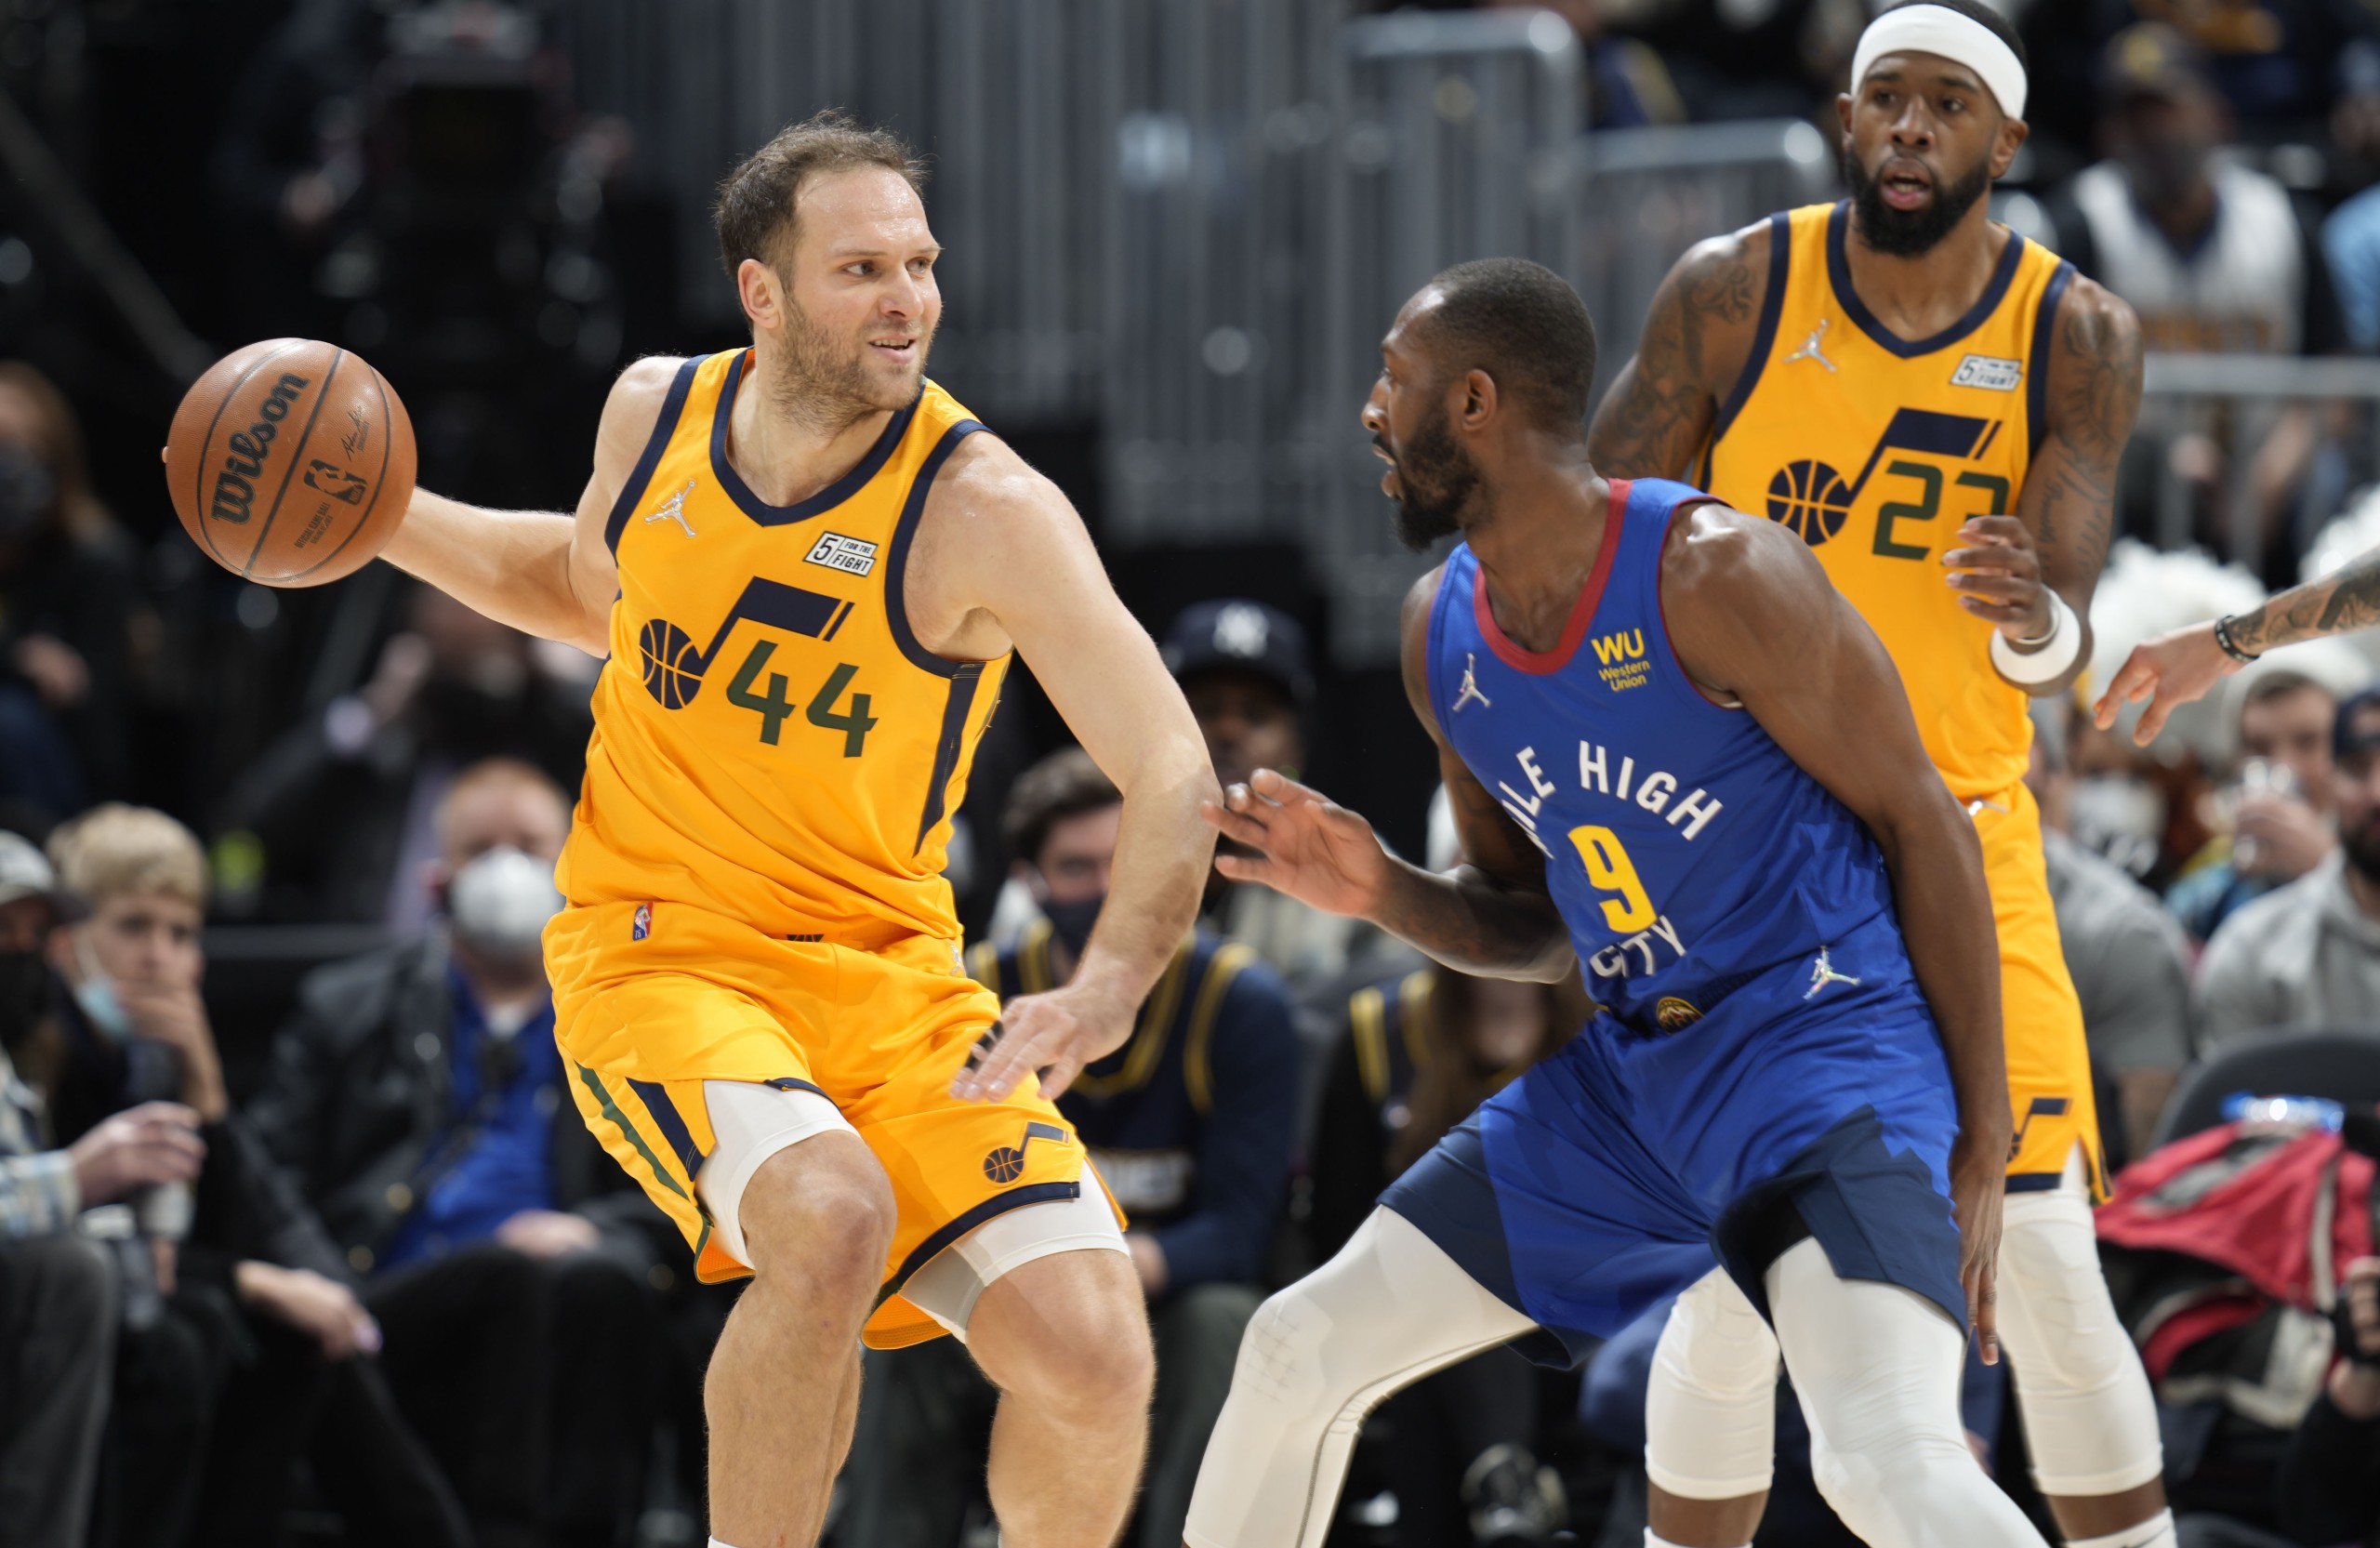 Utah Jazz forward Bojan Bogdanovic, left, looks to pass the ball as Denver Nuggets guard Davon Reed defends in the first half of an NBA basketball game Wednesday, Jan. 5, 2022, in Denver. (AP Photo/David Zalubowski)